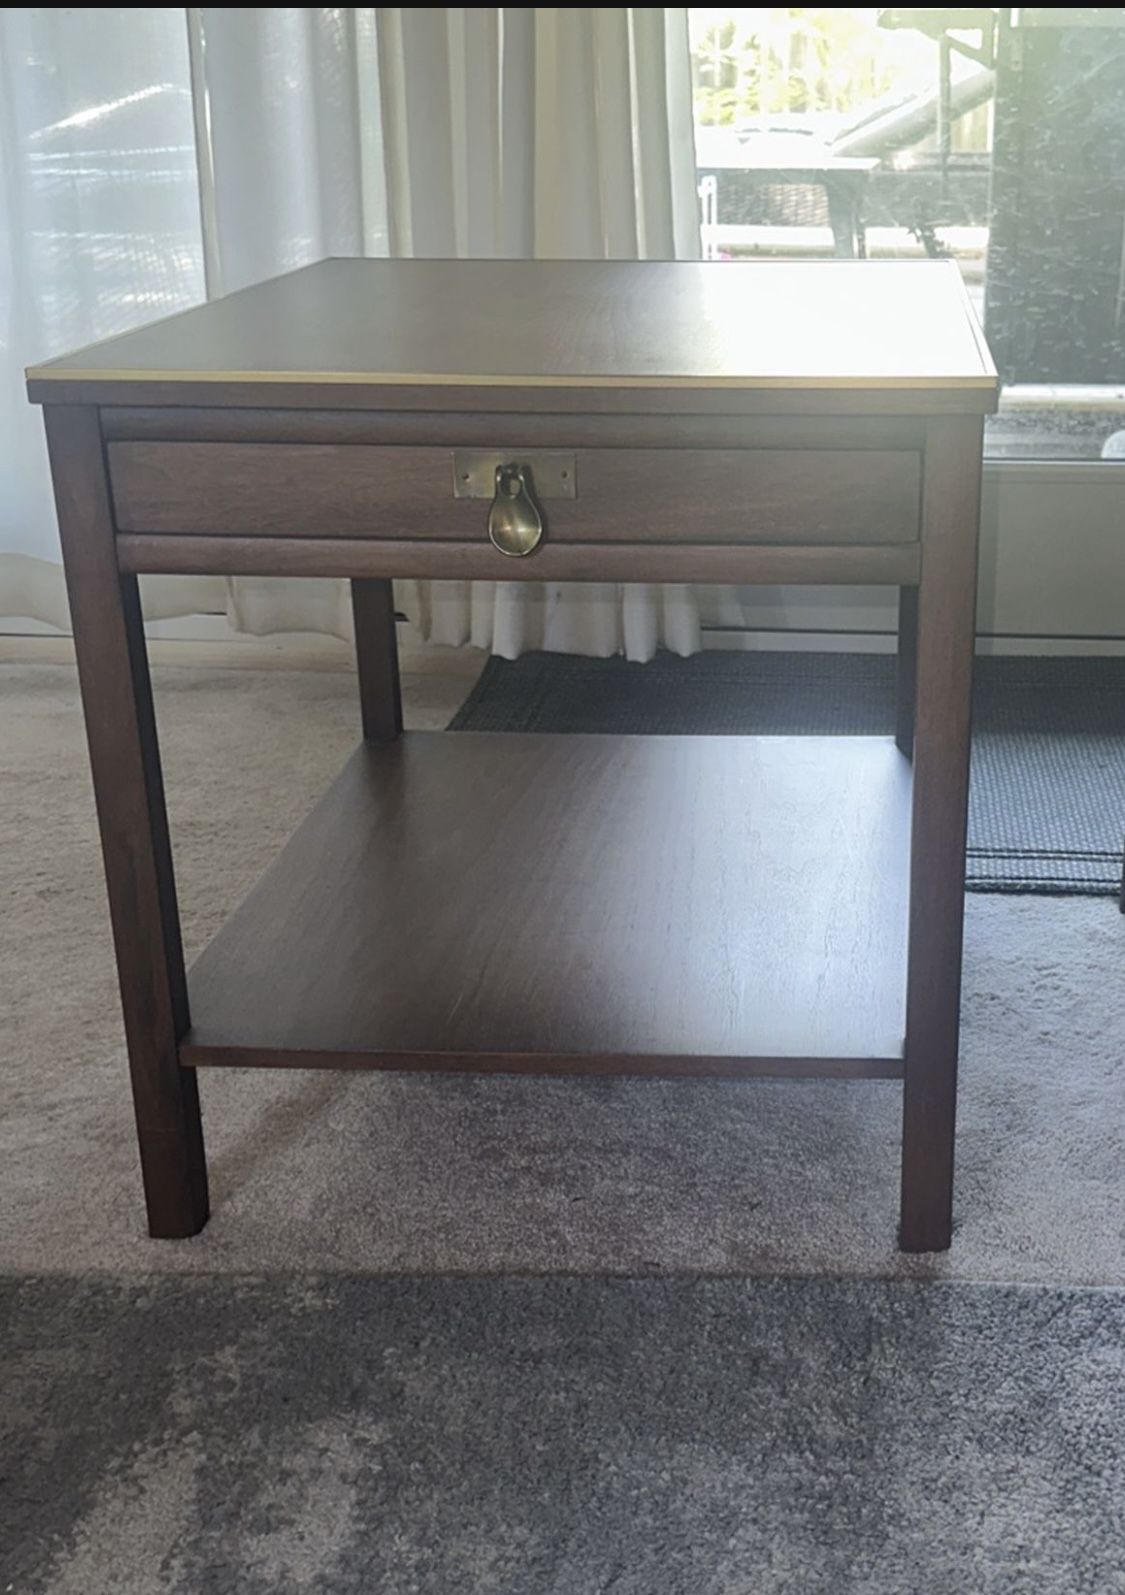 SET OF 2 End tables GRAND RAPIDS